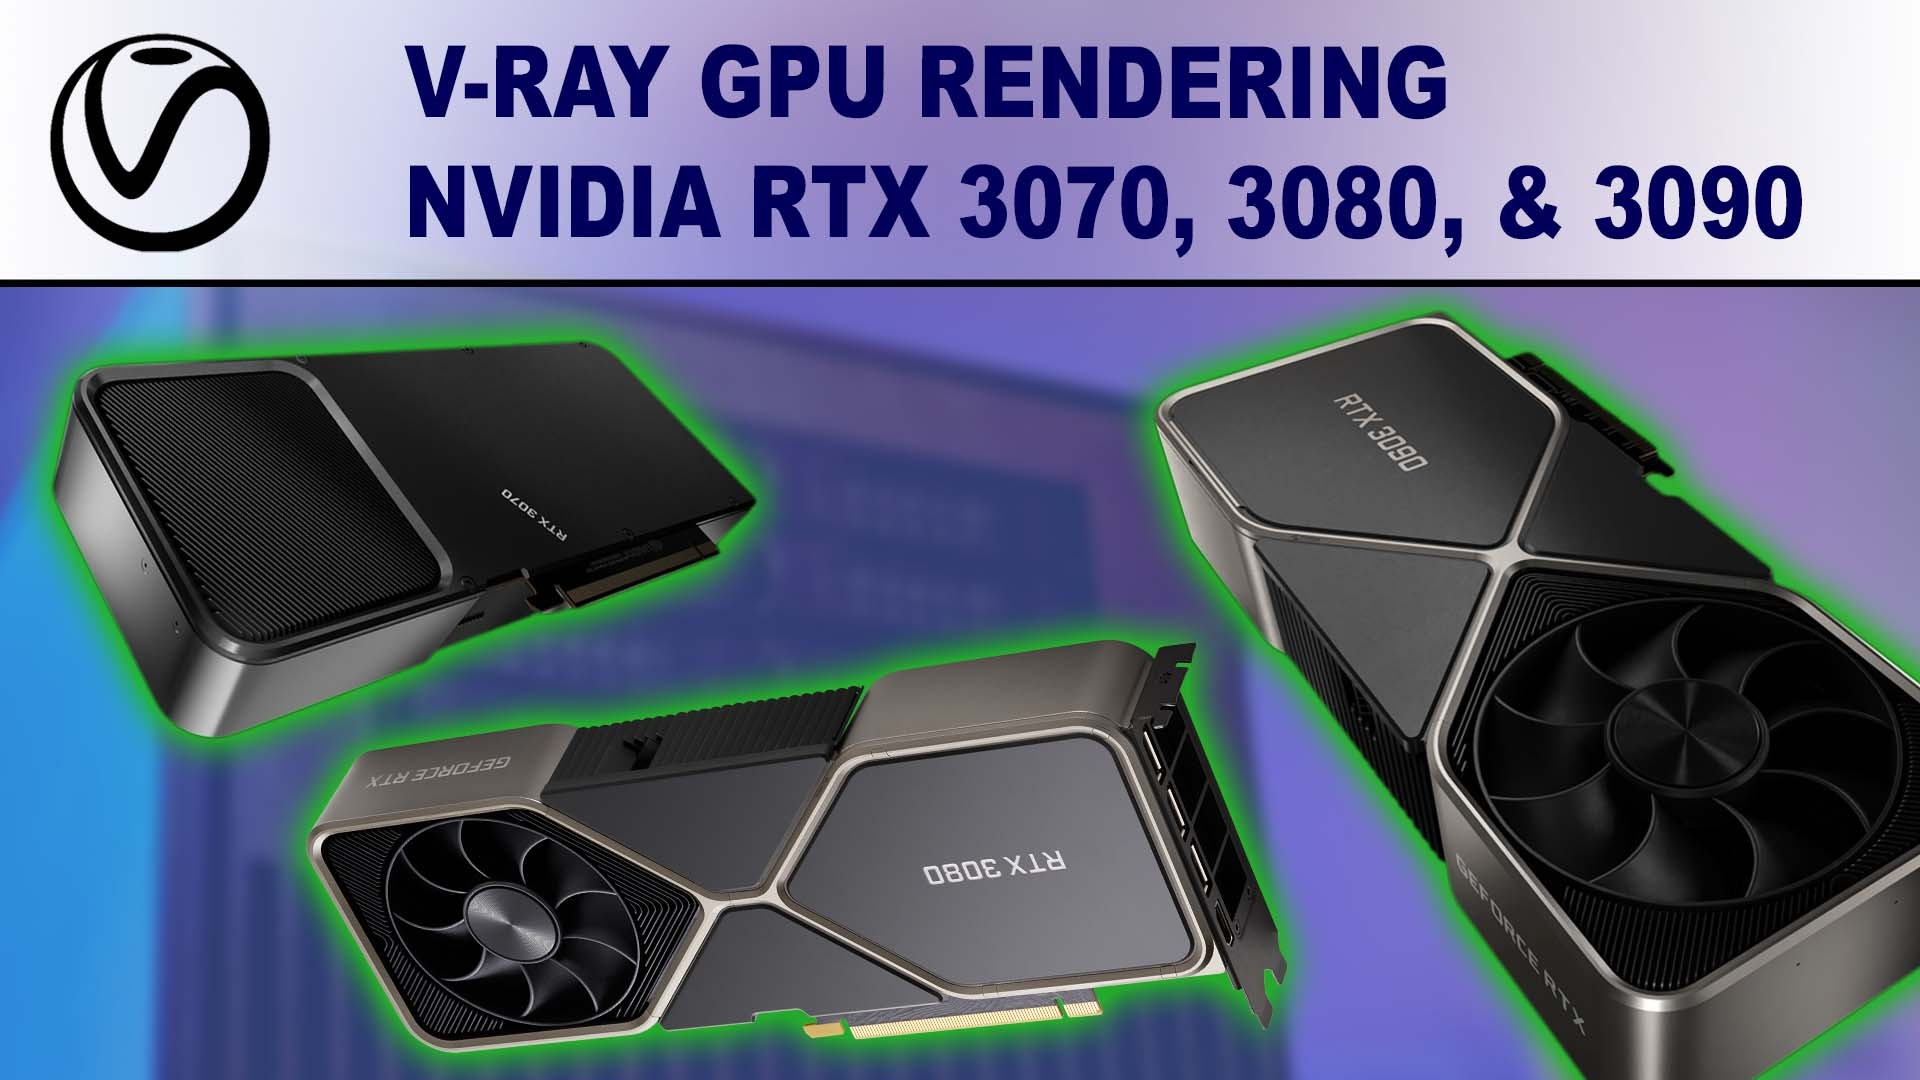 V-Ray GPU Rendering Performance Review for NVIDIA GeForce RTX 3070 8GB, 3080 10GB & 3090 24GB